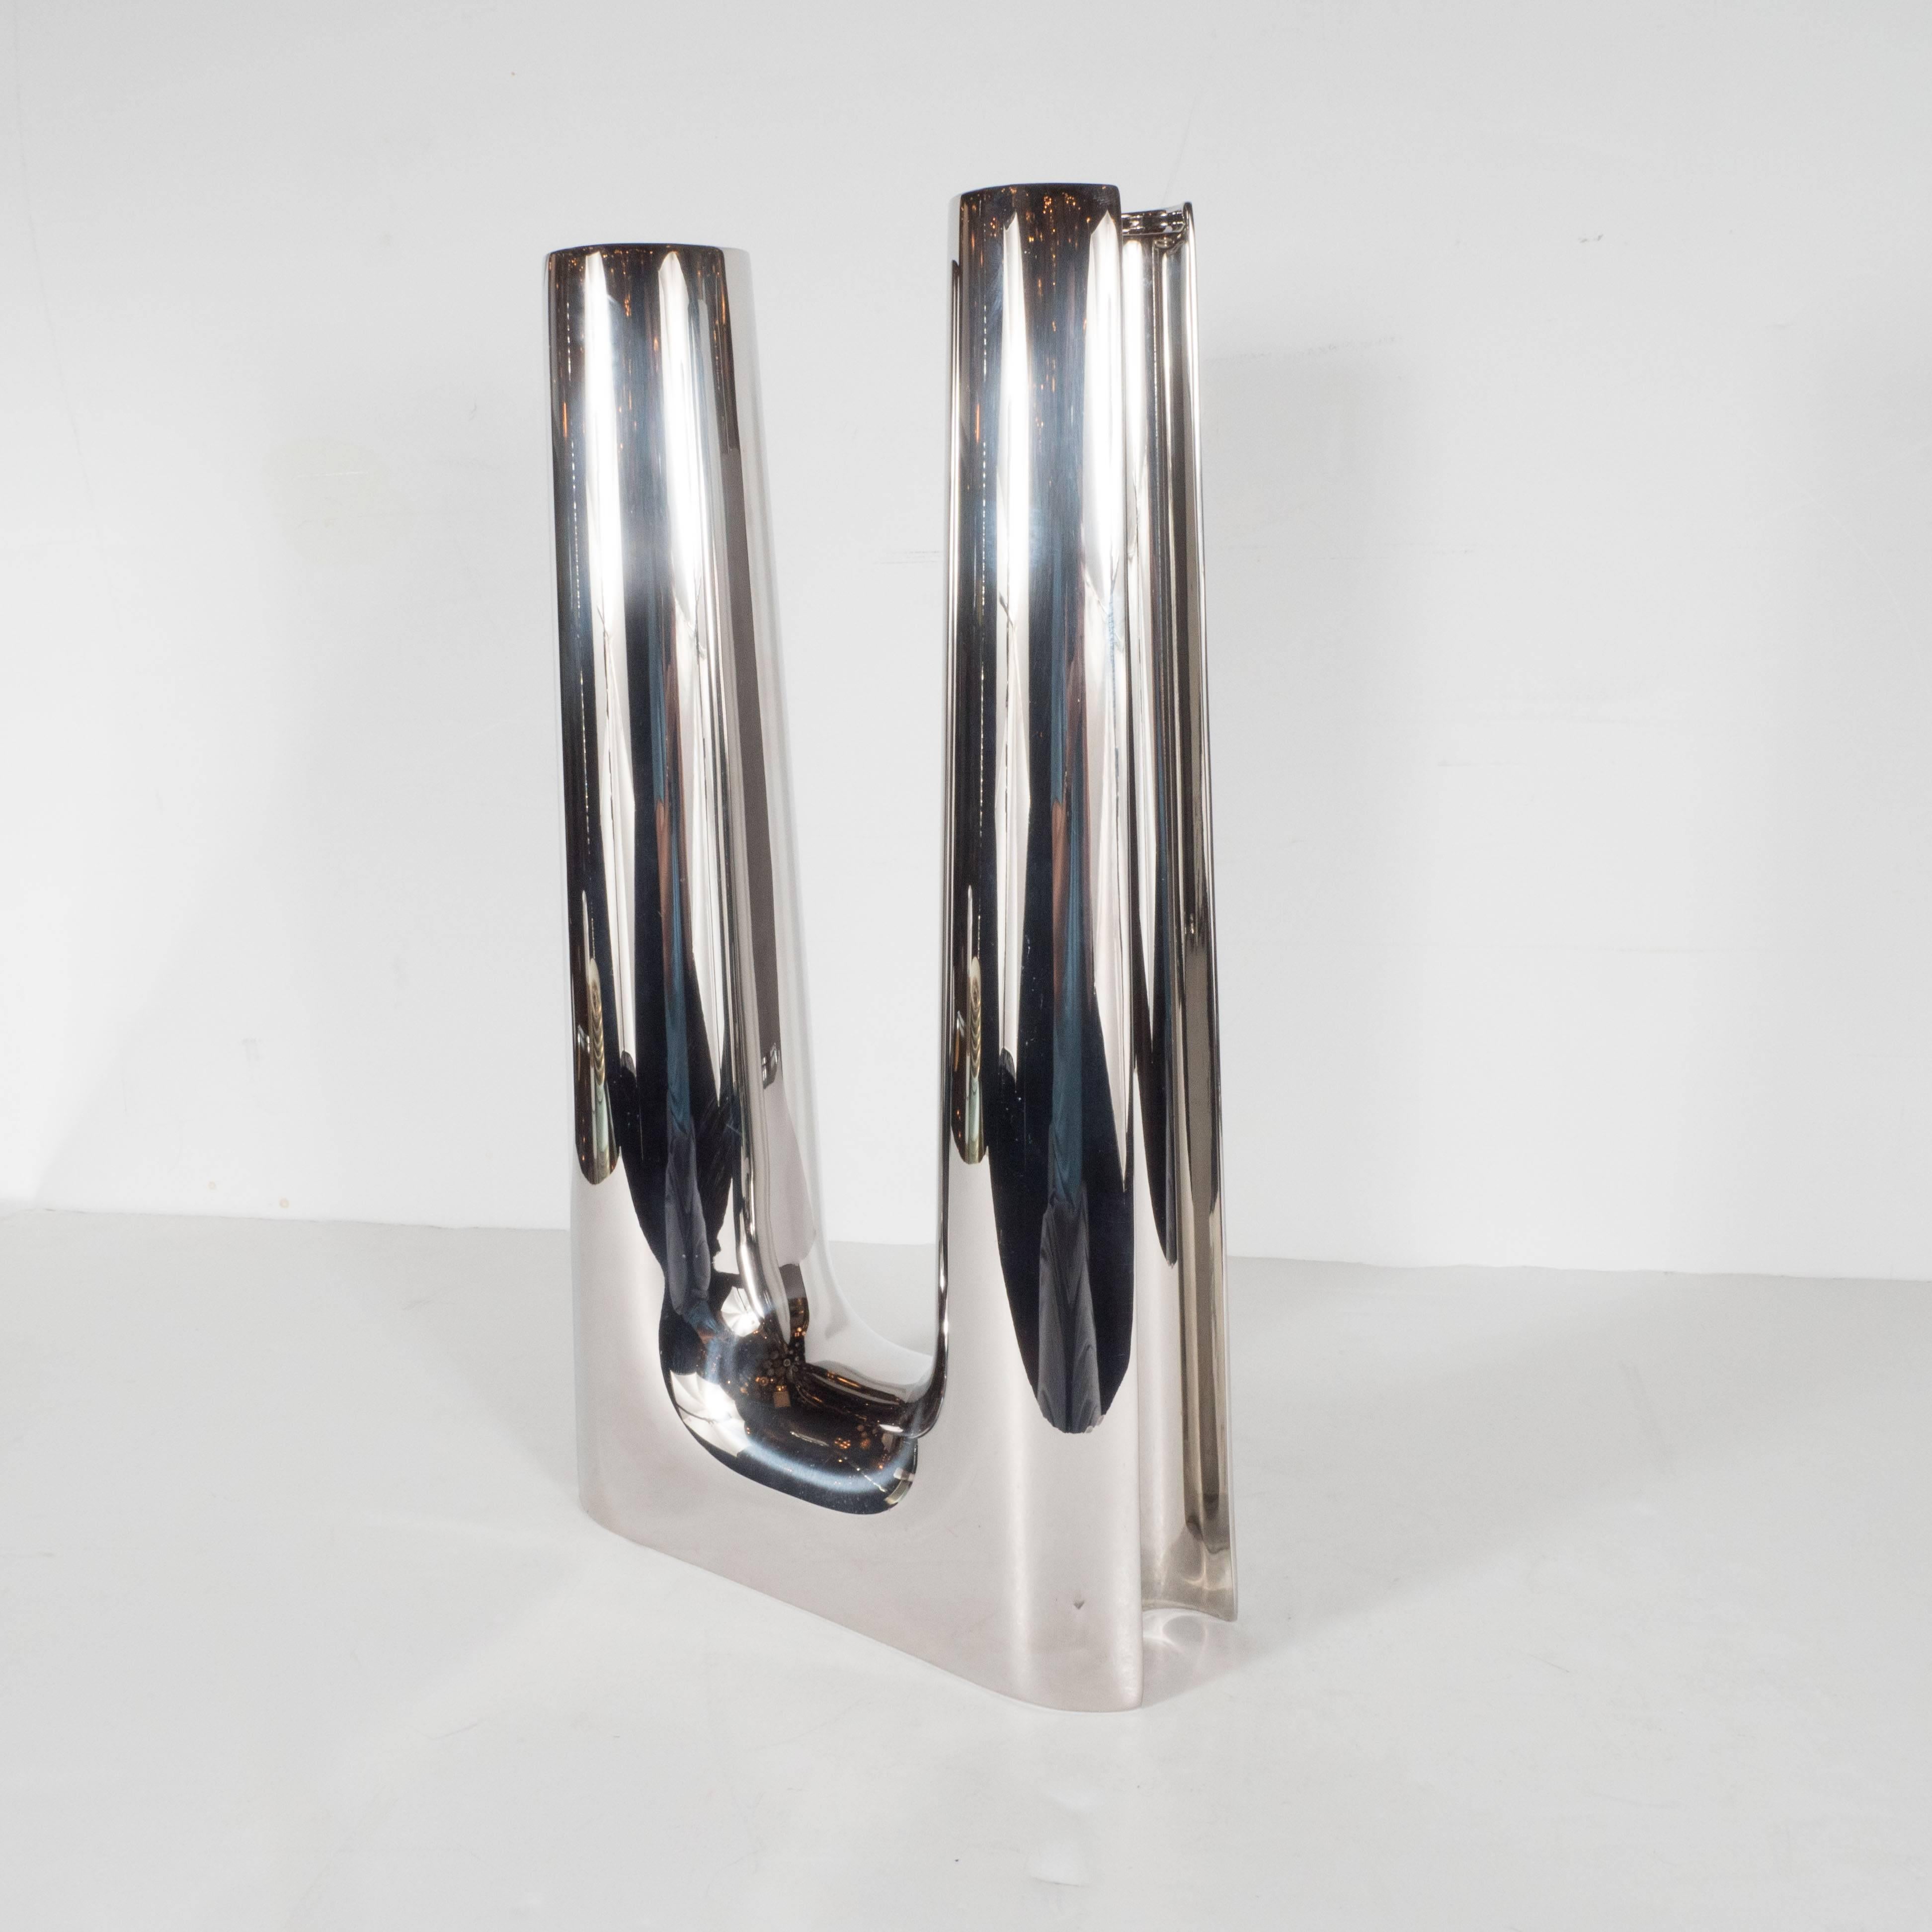 This stunning candleholder is part of the legendary Danish design firm, George Jensen's Copenhagan collection. Søren Georg Jensen originally created this model (1085, Large) to decorate the alter of a Mid-Century Scandinavian church in the 1960s.